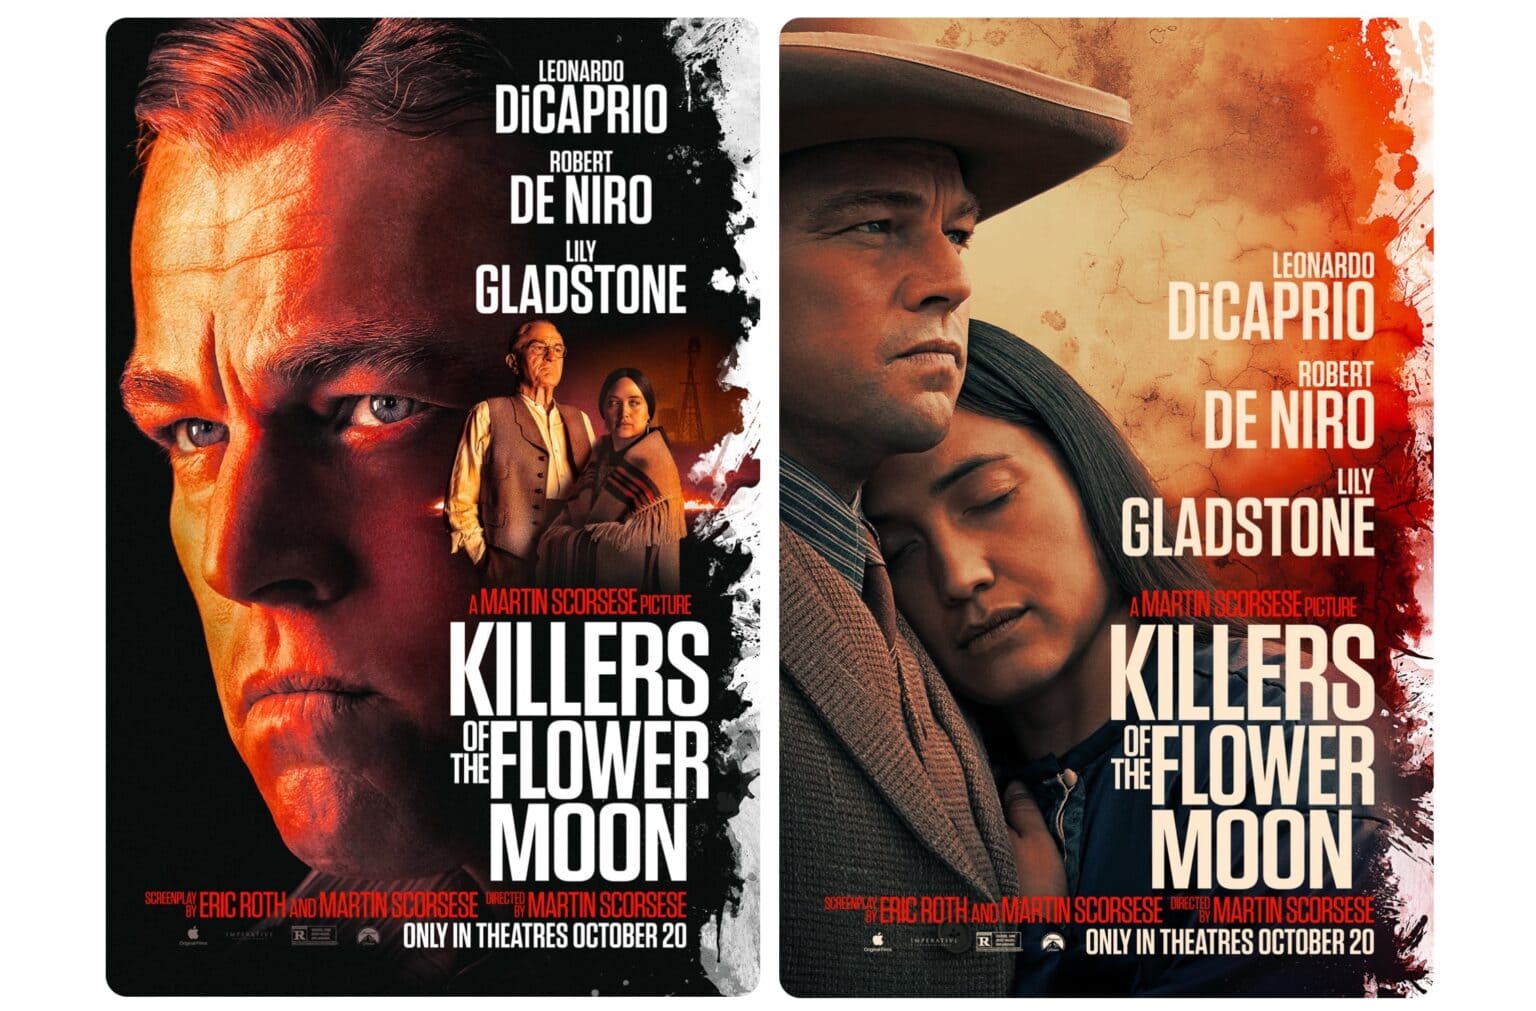 Martin Scorsese’s 'Killers of the Flower Moon' hits theaters in October.